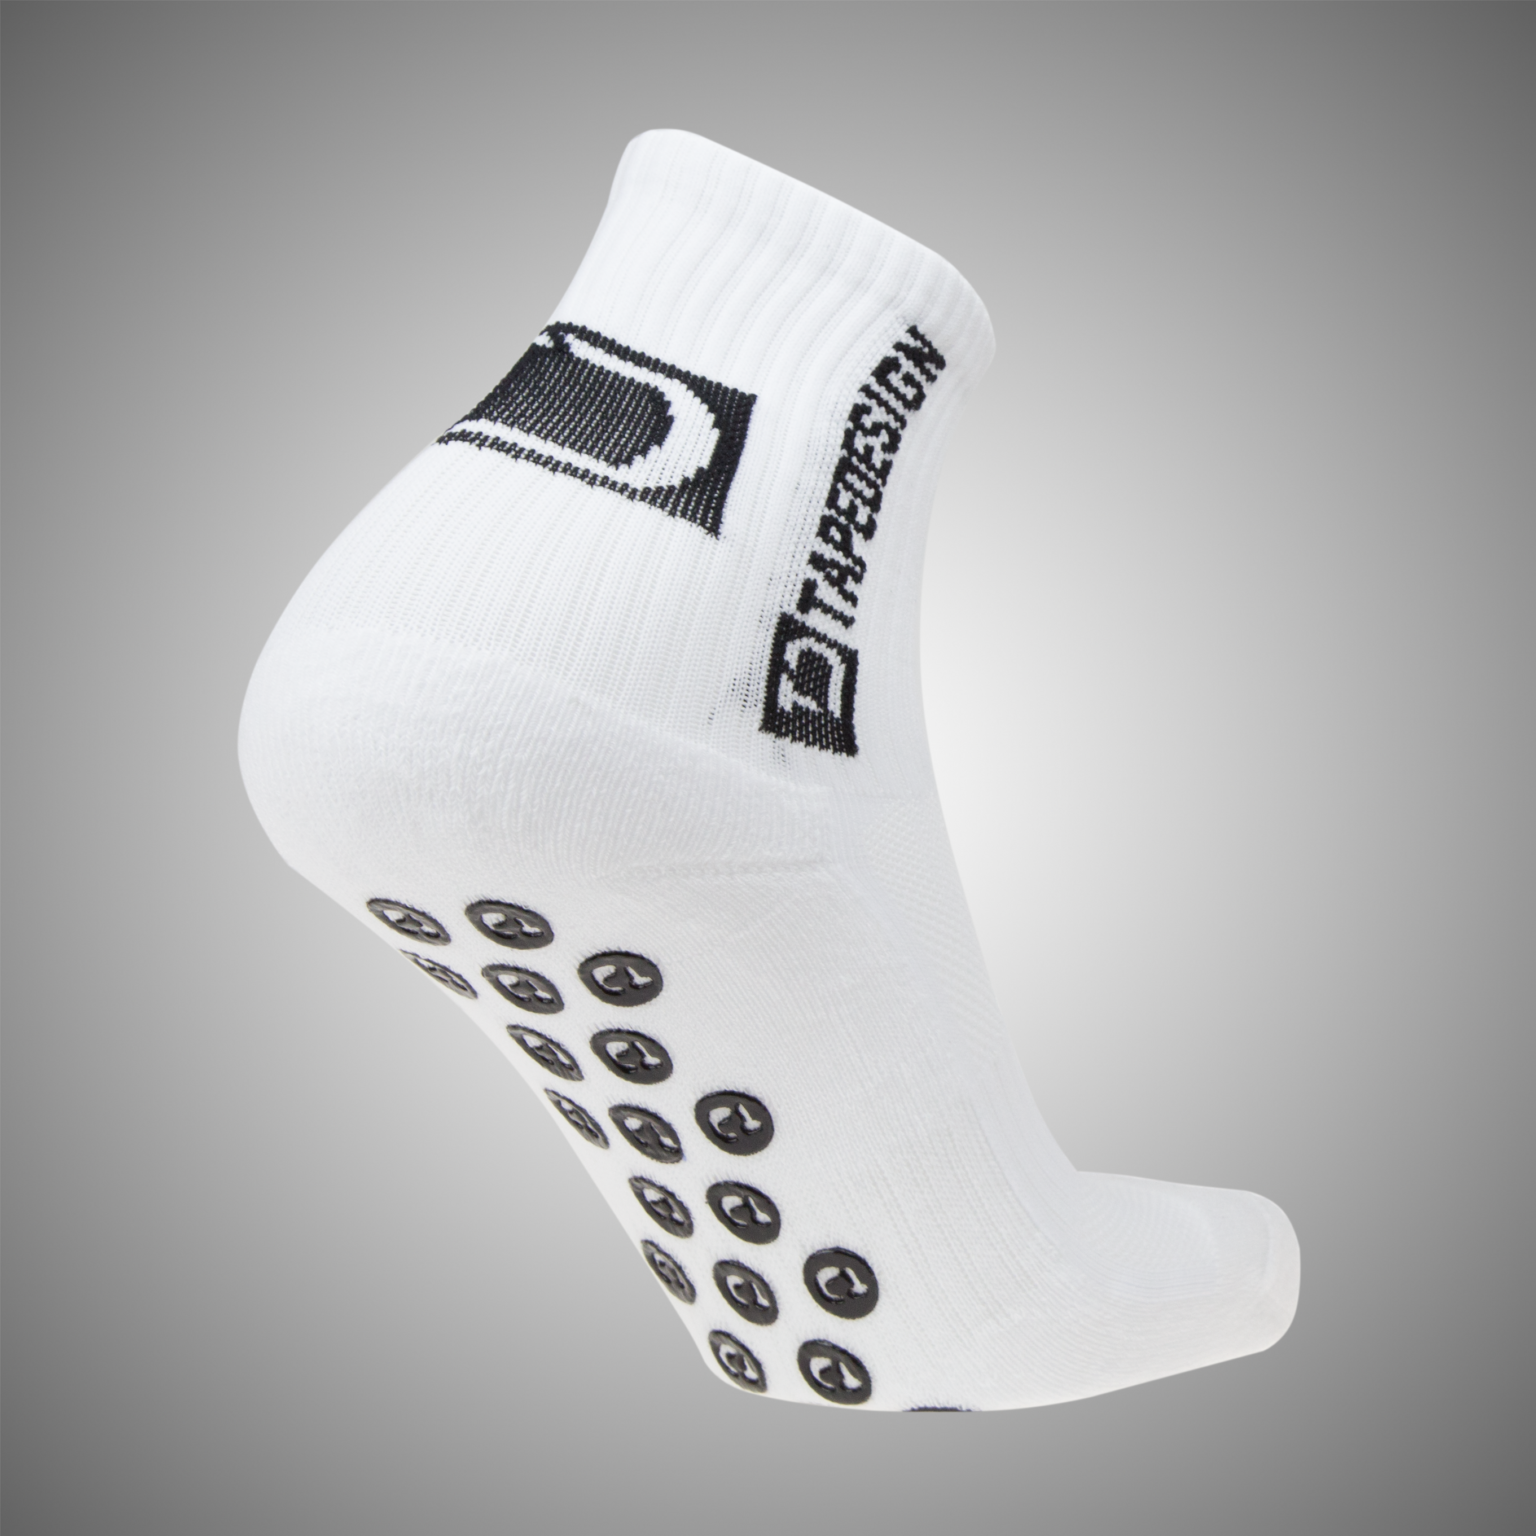 Buy Tape Design Classic Grip Performance Youth Socks in wholesale!